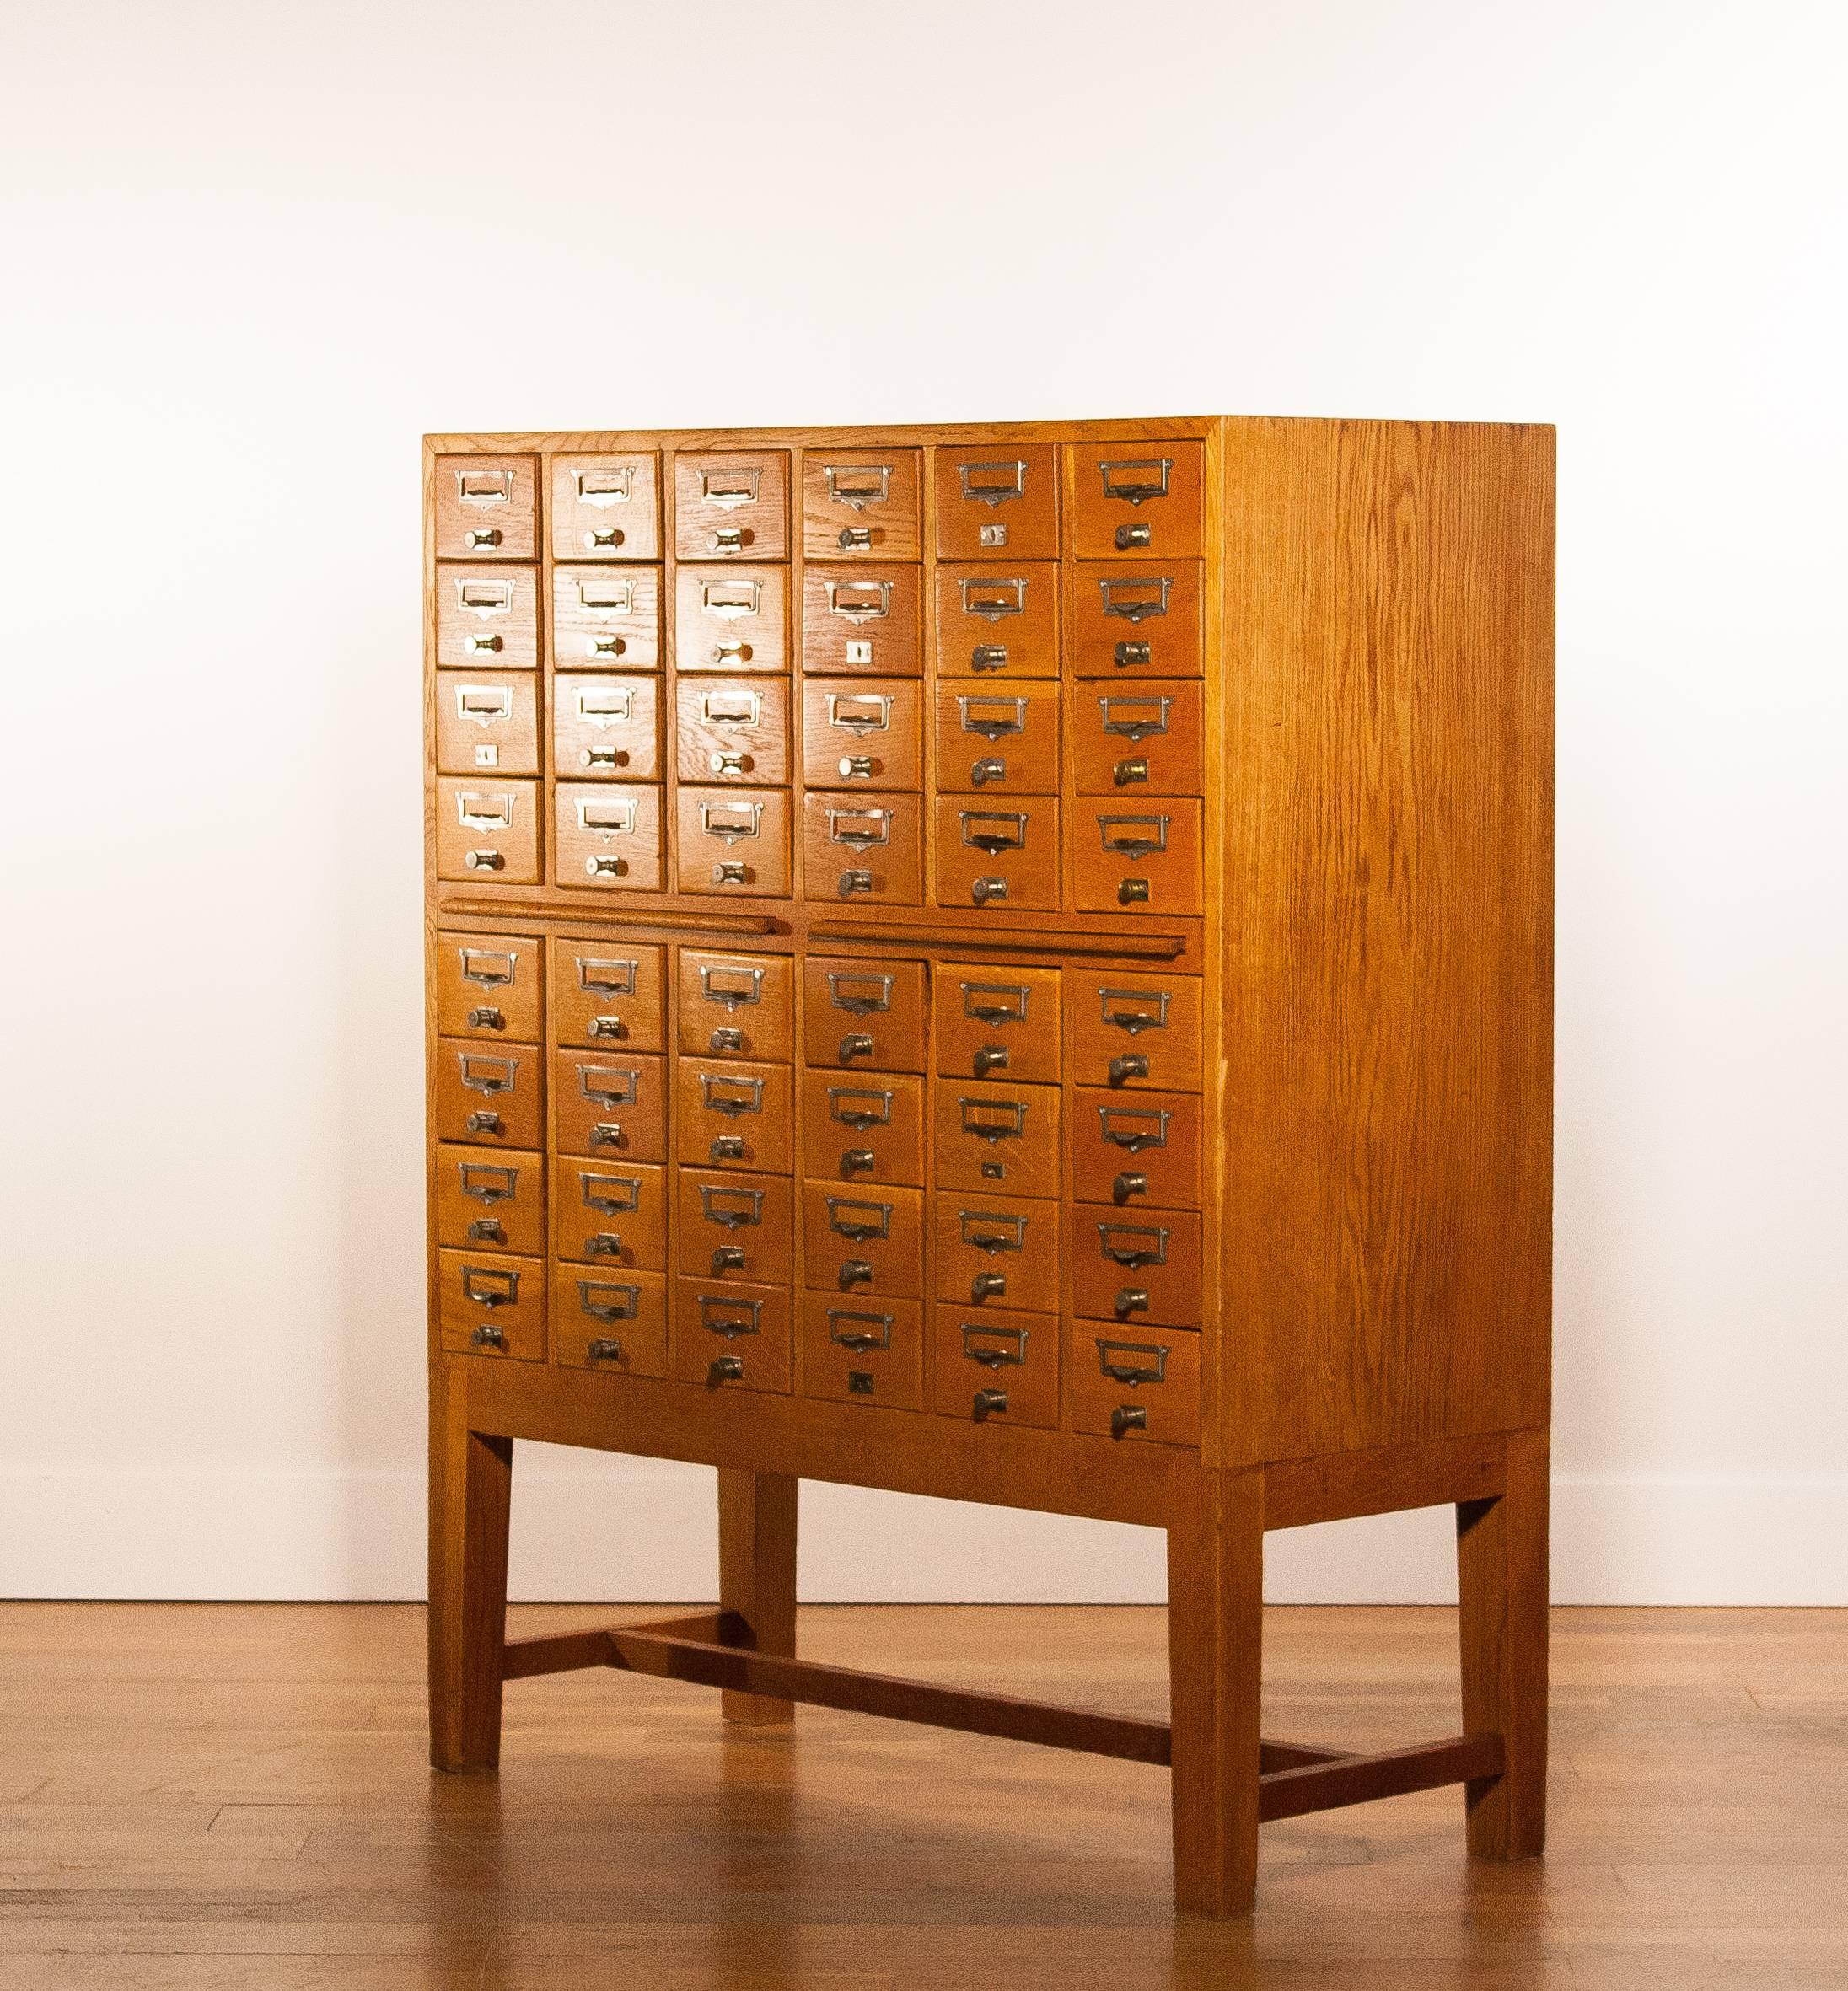 Beautiful oak file cabinet in fair condition.

The solid oak cabinet counters 48 drawers. All made of solid oak.

Also the cabinet has two extendable worksheets in oak.

Period: 1900-1940.

The dimensions are:
127 cm. height,
103 cm.